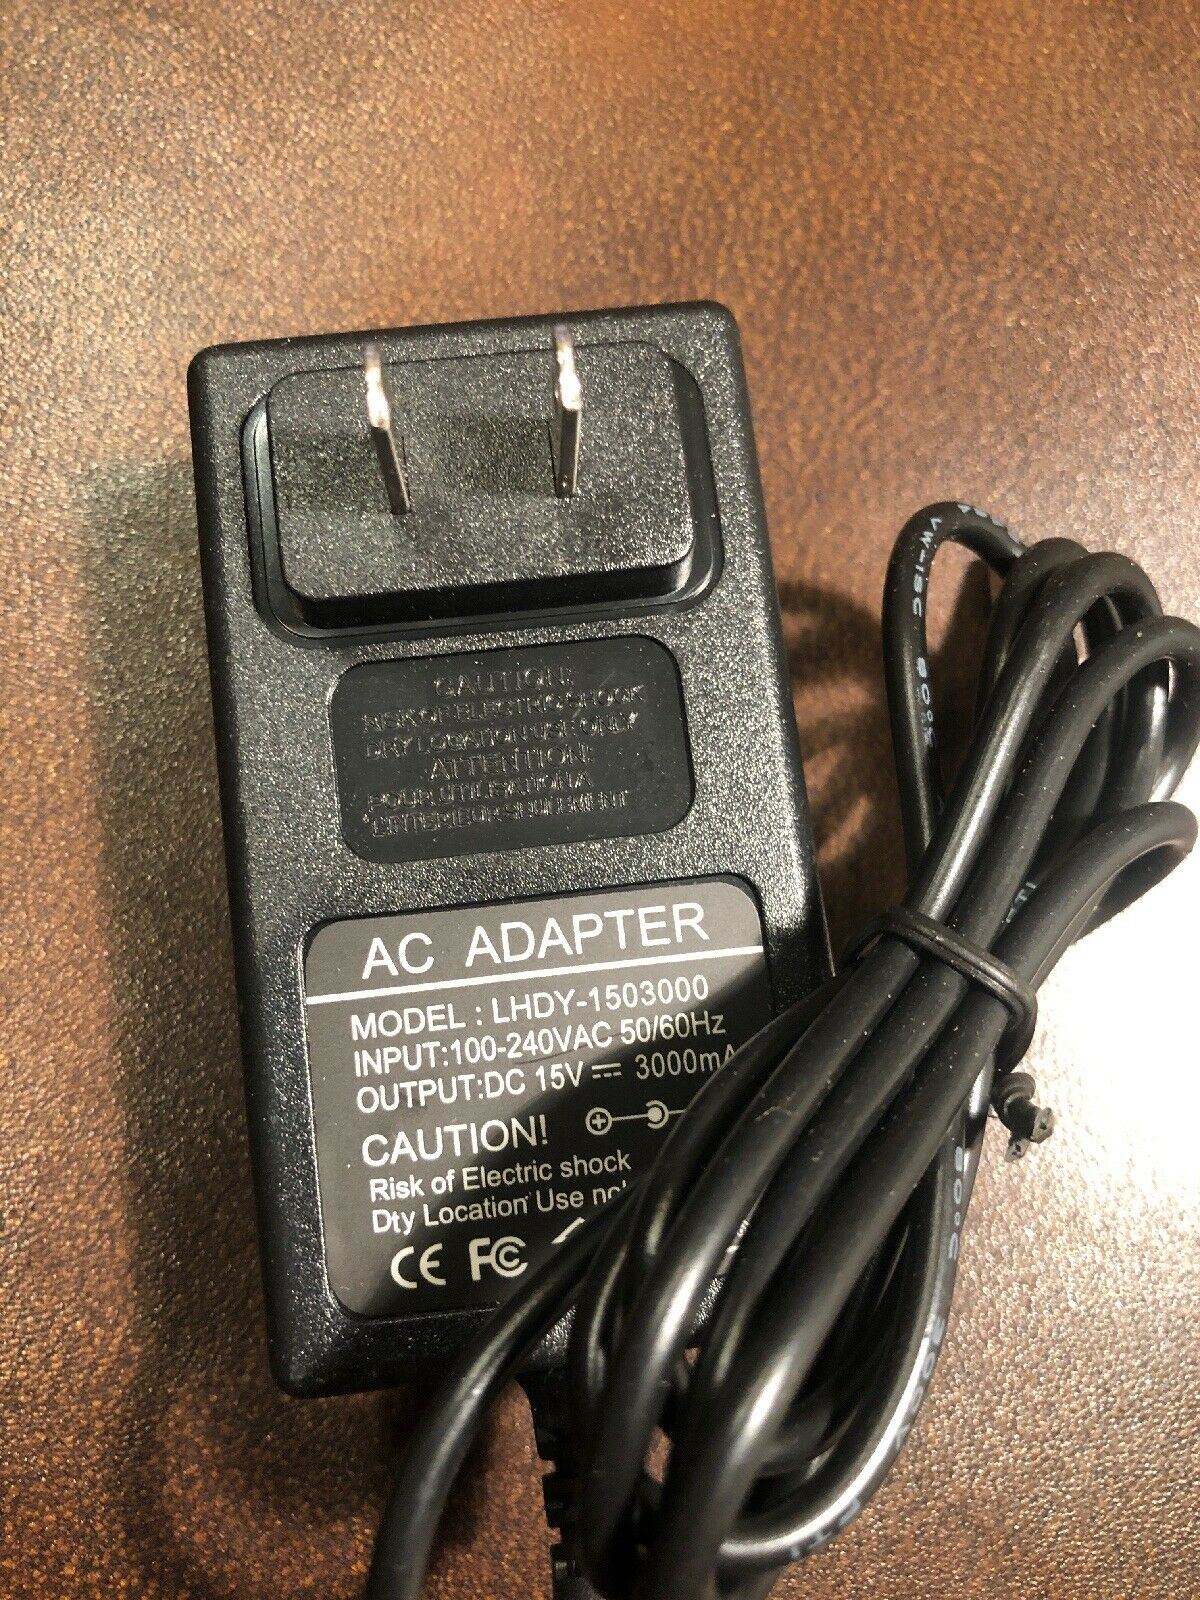 New AC Adapter LHDY-1503000 Power Supply 15V 3000mA